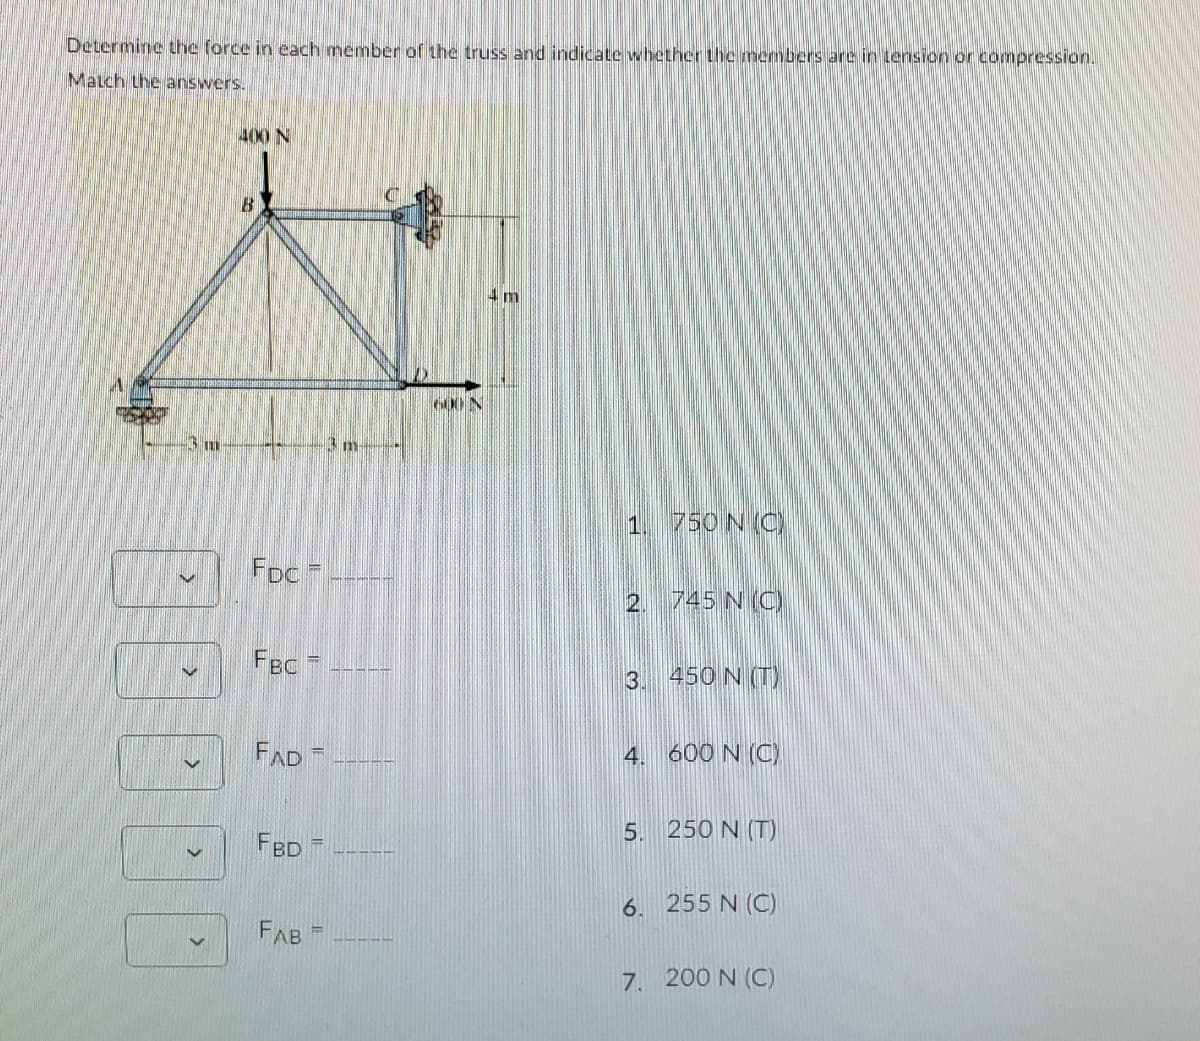 Determine the force in cach member of the truss and indicate whether the members are in tension or compression.
Match the answers.
400 N
B.
4 m
6001
1. 750 N (C)
FDc
2. 745 N (C
FBC
3. 450 N (T)
FAD
4. 600 N (C)
5. 250 N (T)
FBD
6.
255 N (C)
FAB
7. 200 N (C)
